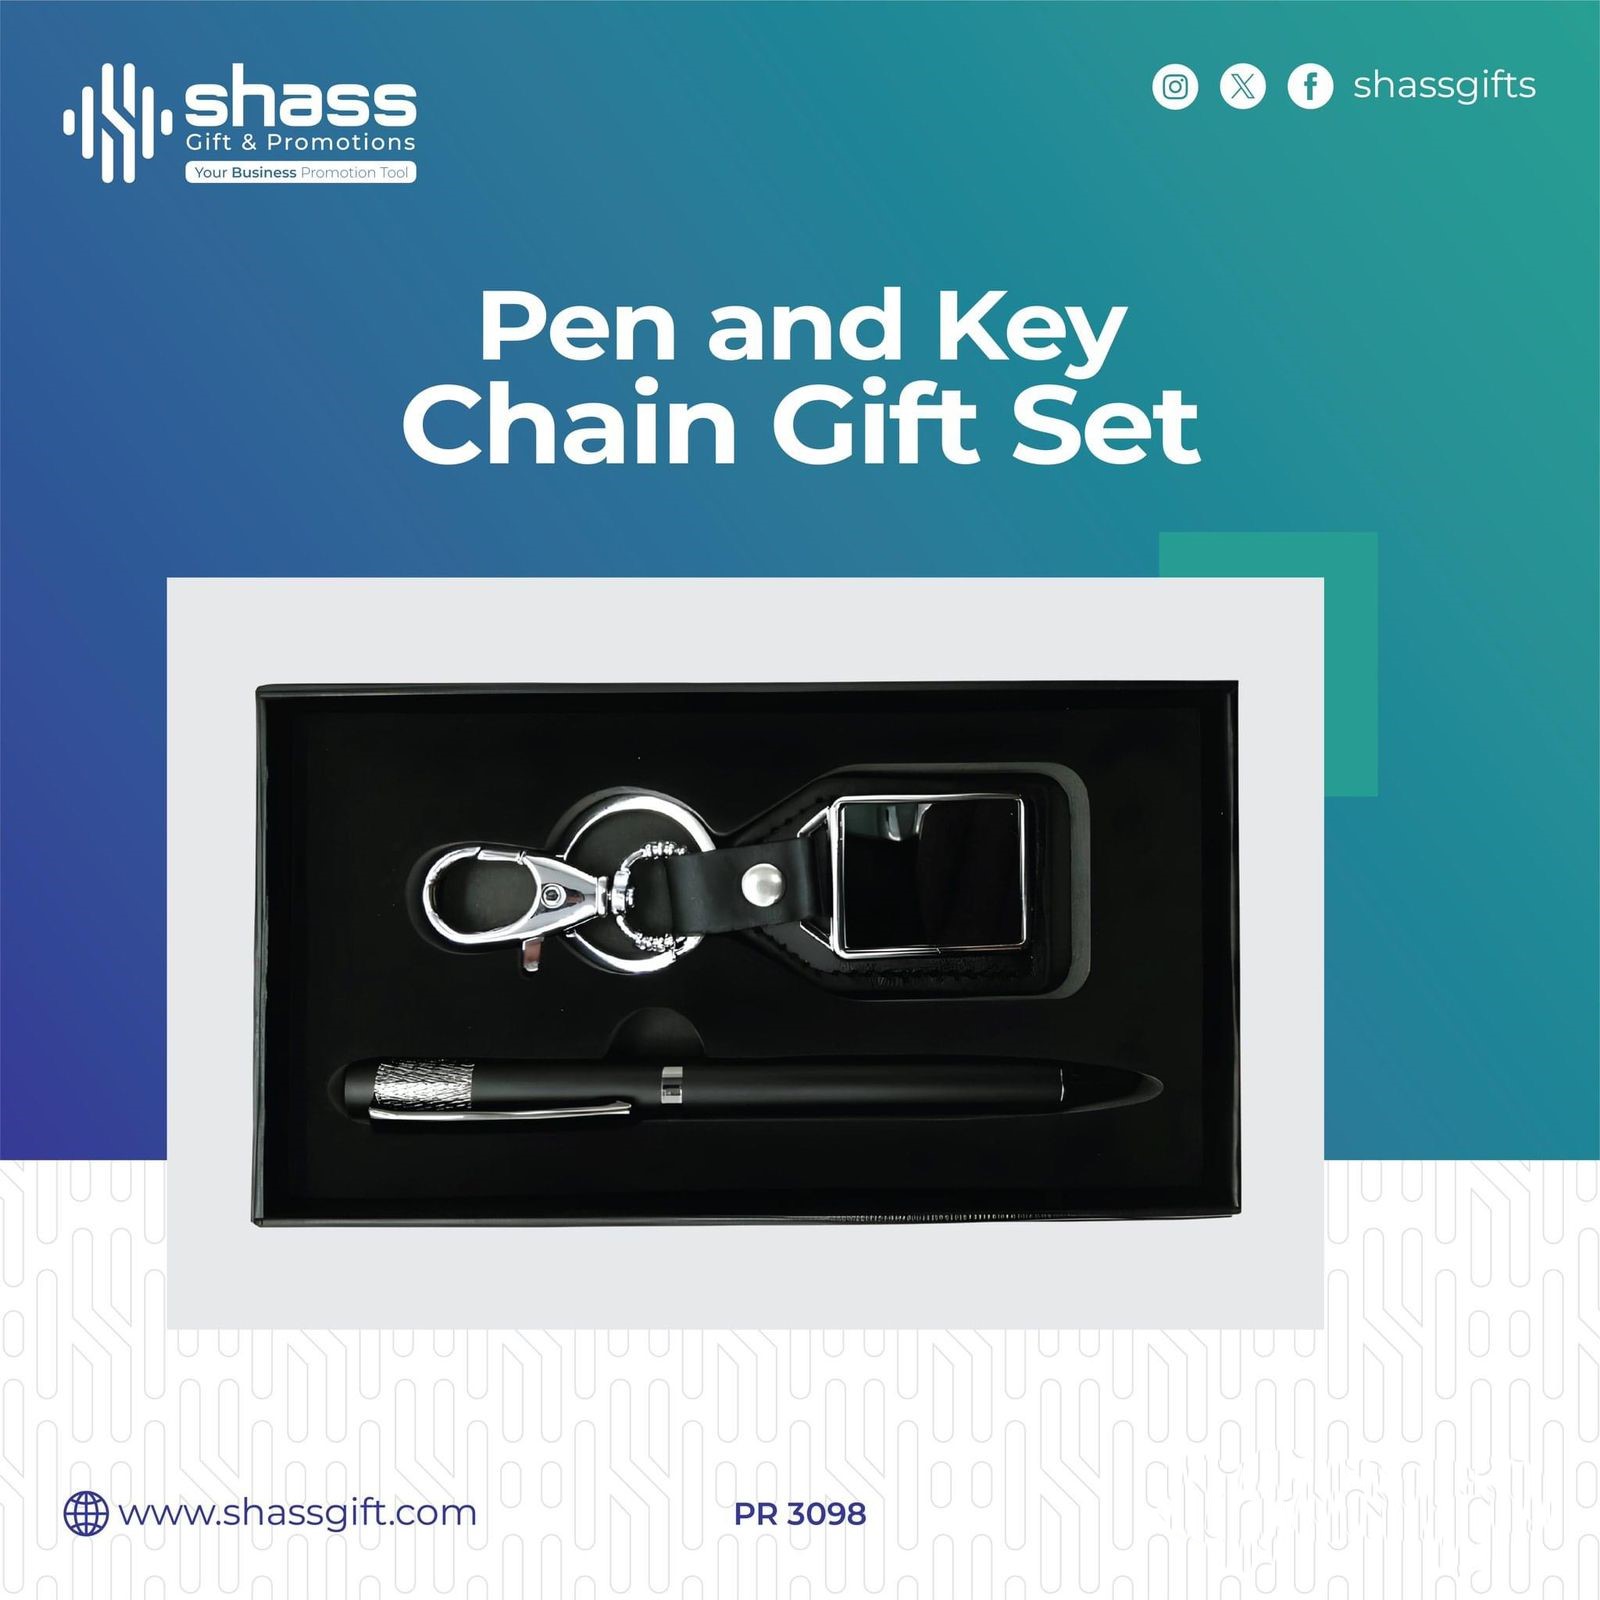 PEN AND KEY CHAIN GIFT SET